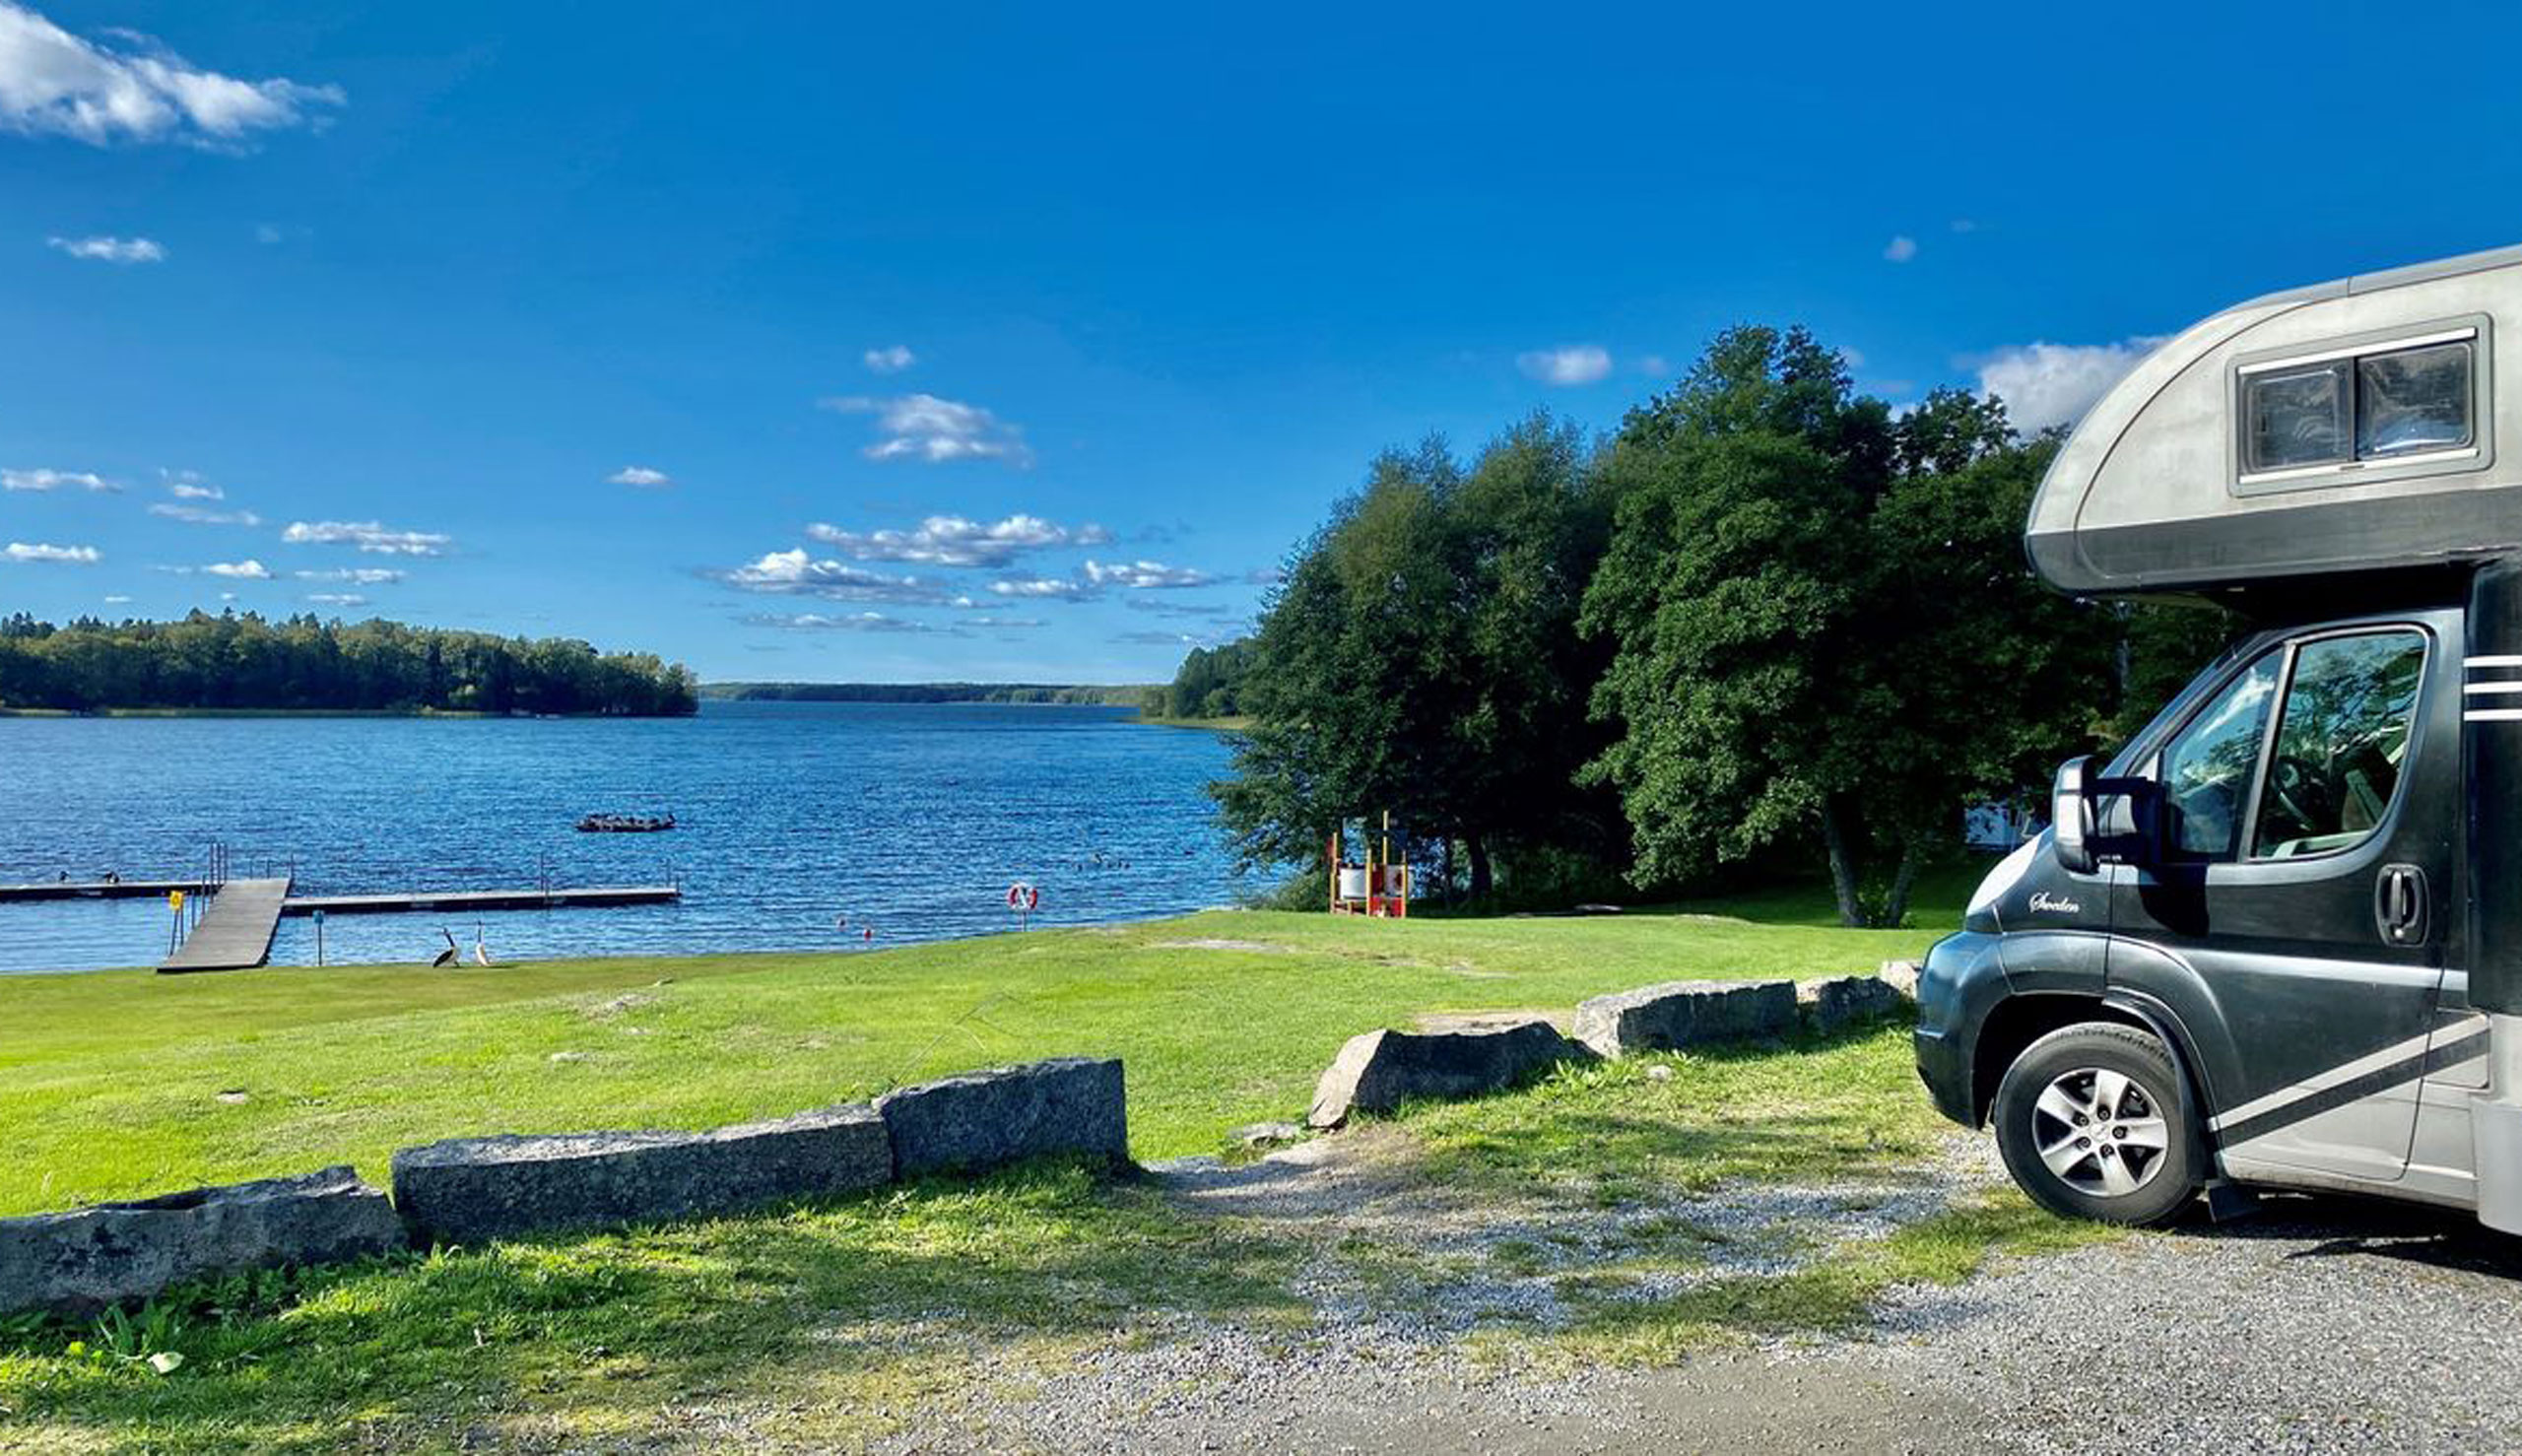 In Sweden, you can park on gravel by a lake, if there are no local restrictions